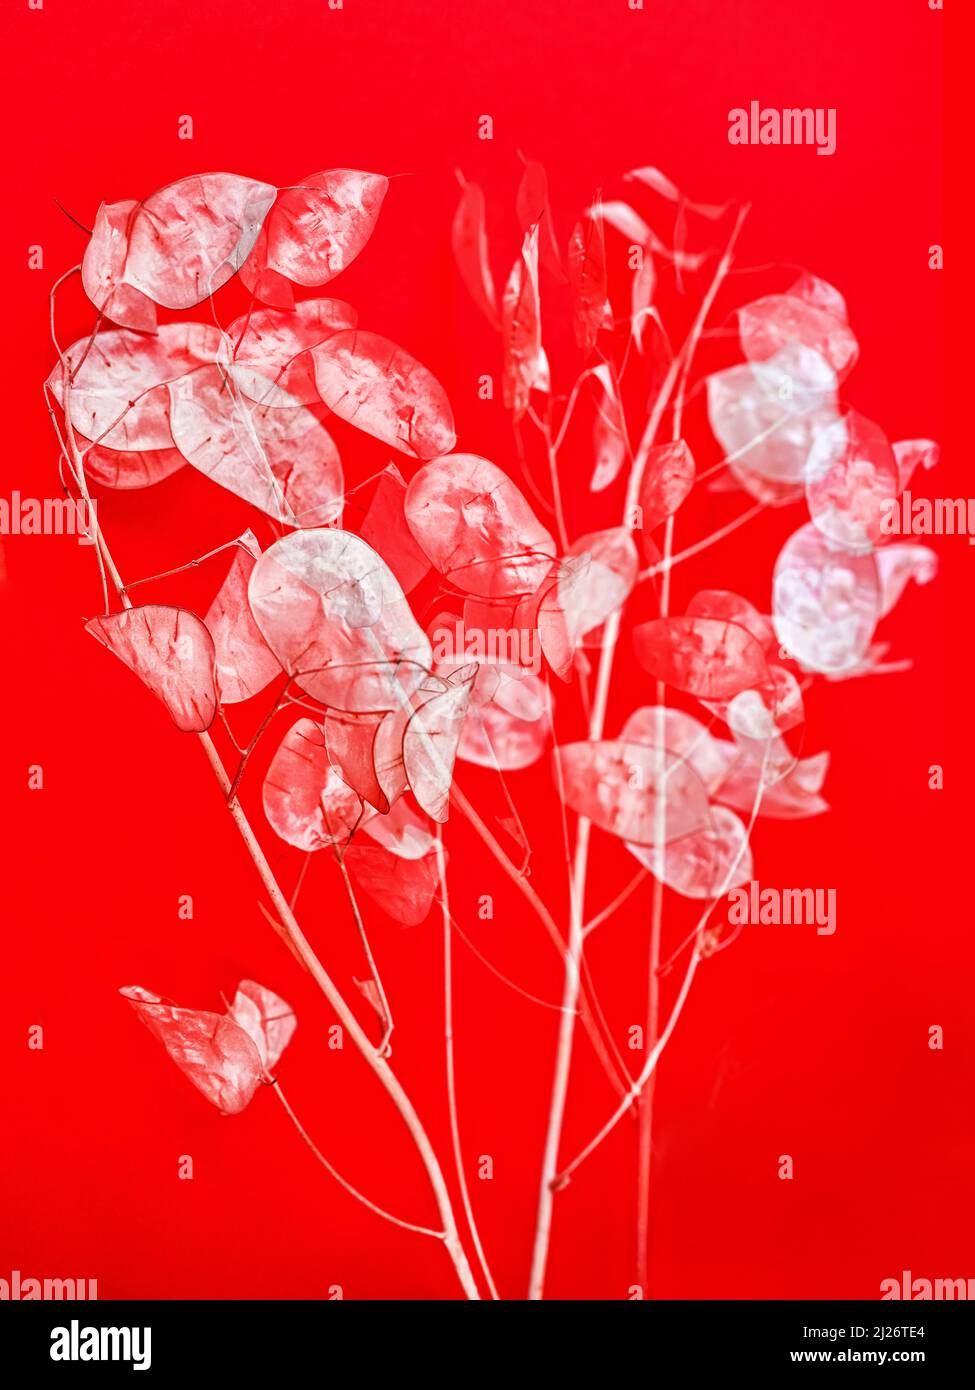 Posy of dried lunaria flower discs on red background, closeup. Multiple exposure. Stock Photo